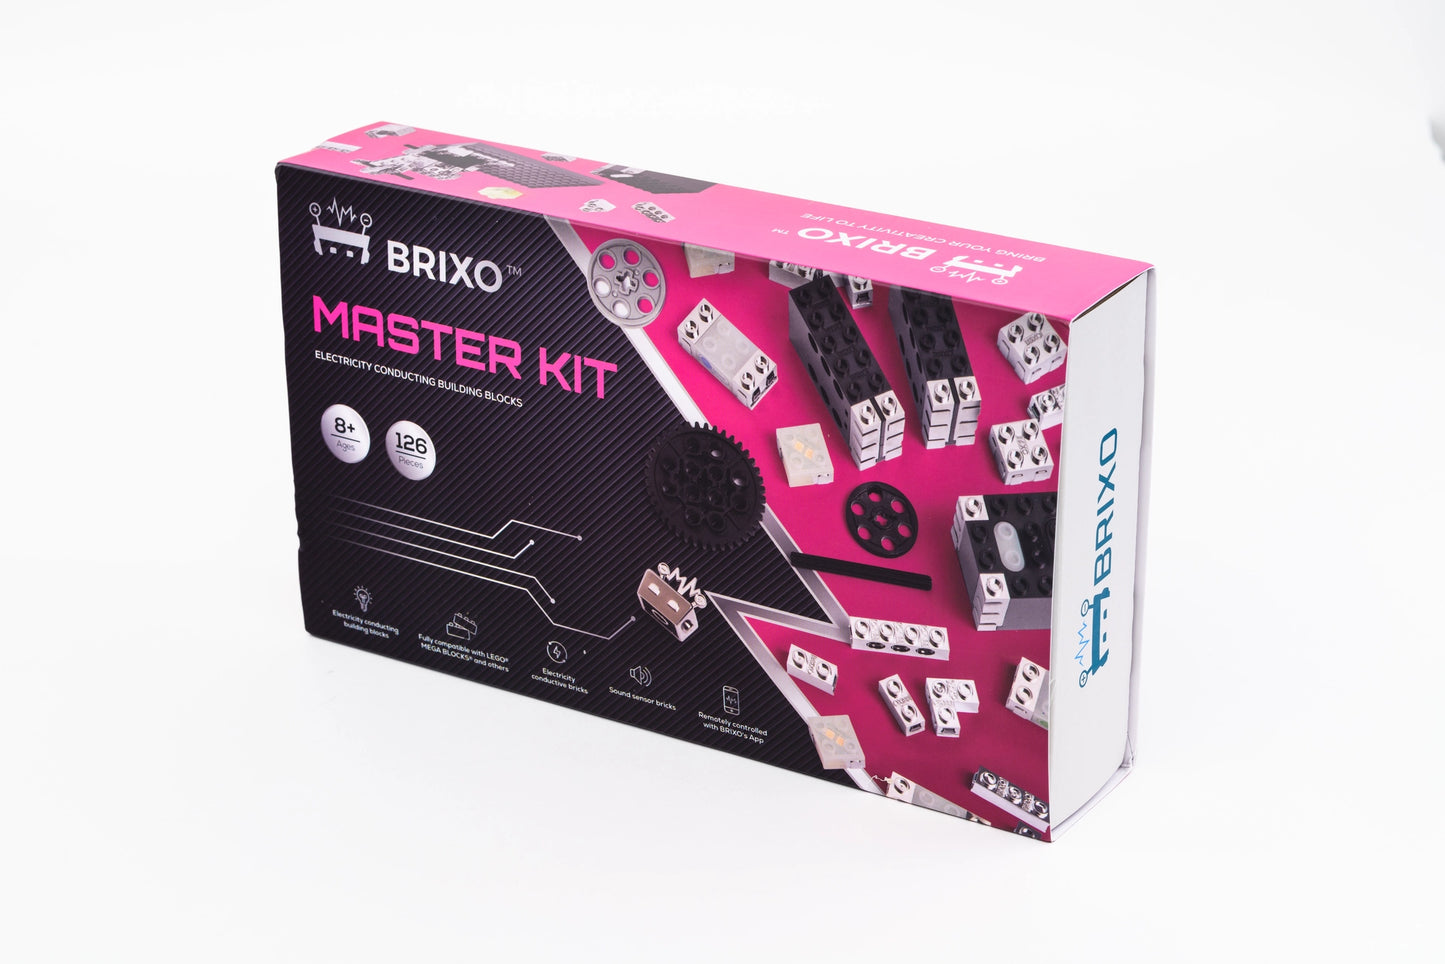 Brixo Master KIT, Electricity conducting Building Blocks, Fully Compatible with All LegoBricks and Models. Meet BRIXO - A New World of Creativity and Innovation. Bring Your LegoBricks to Life.